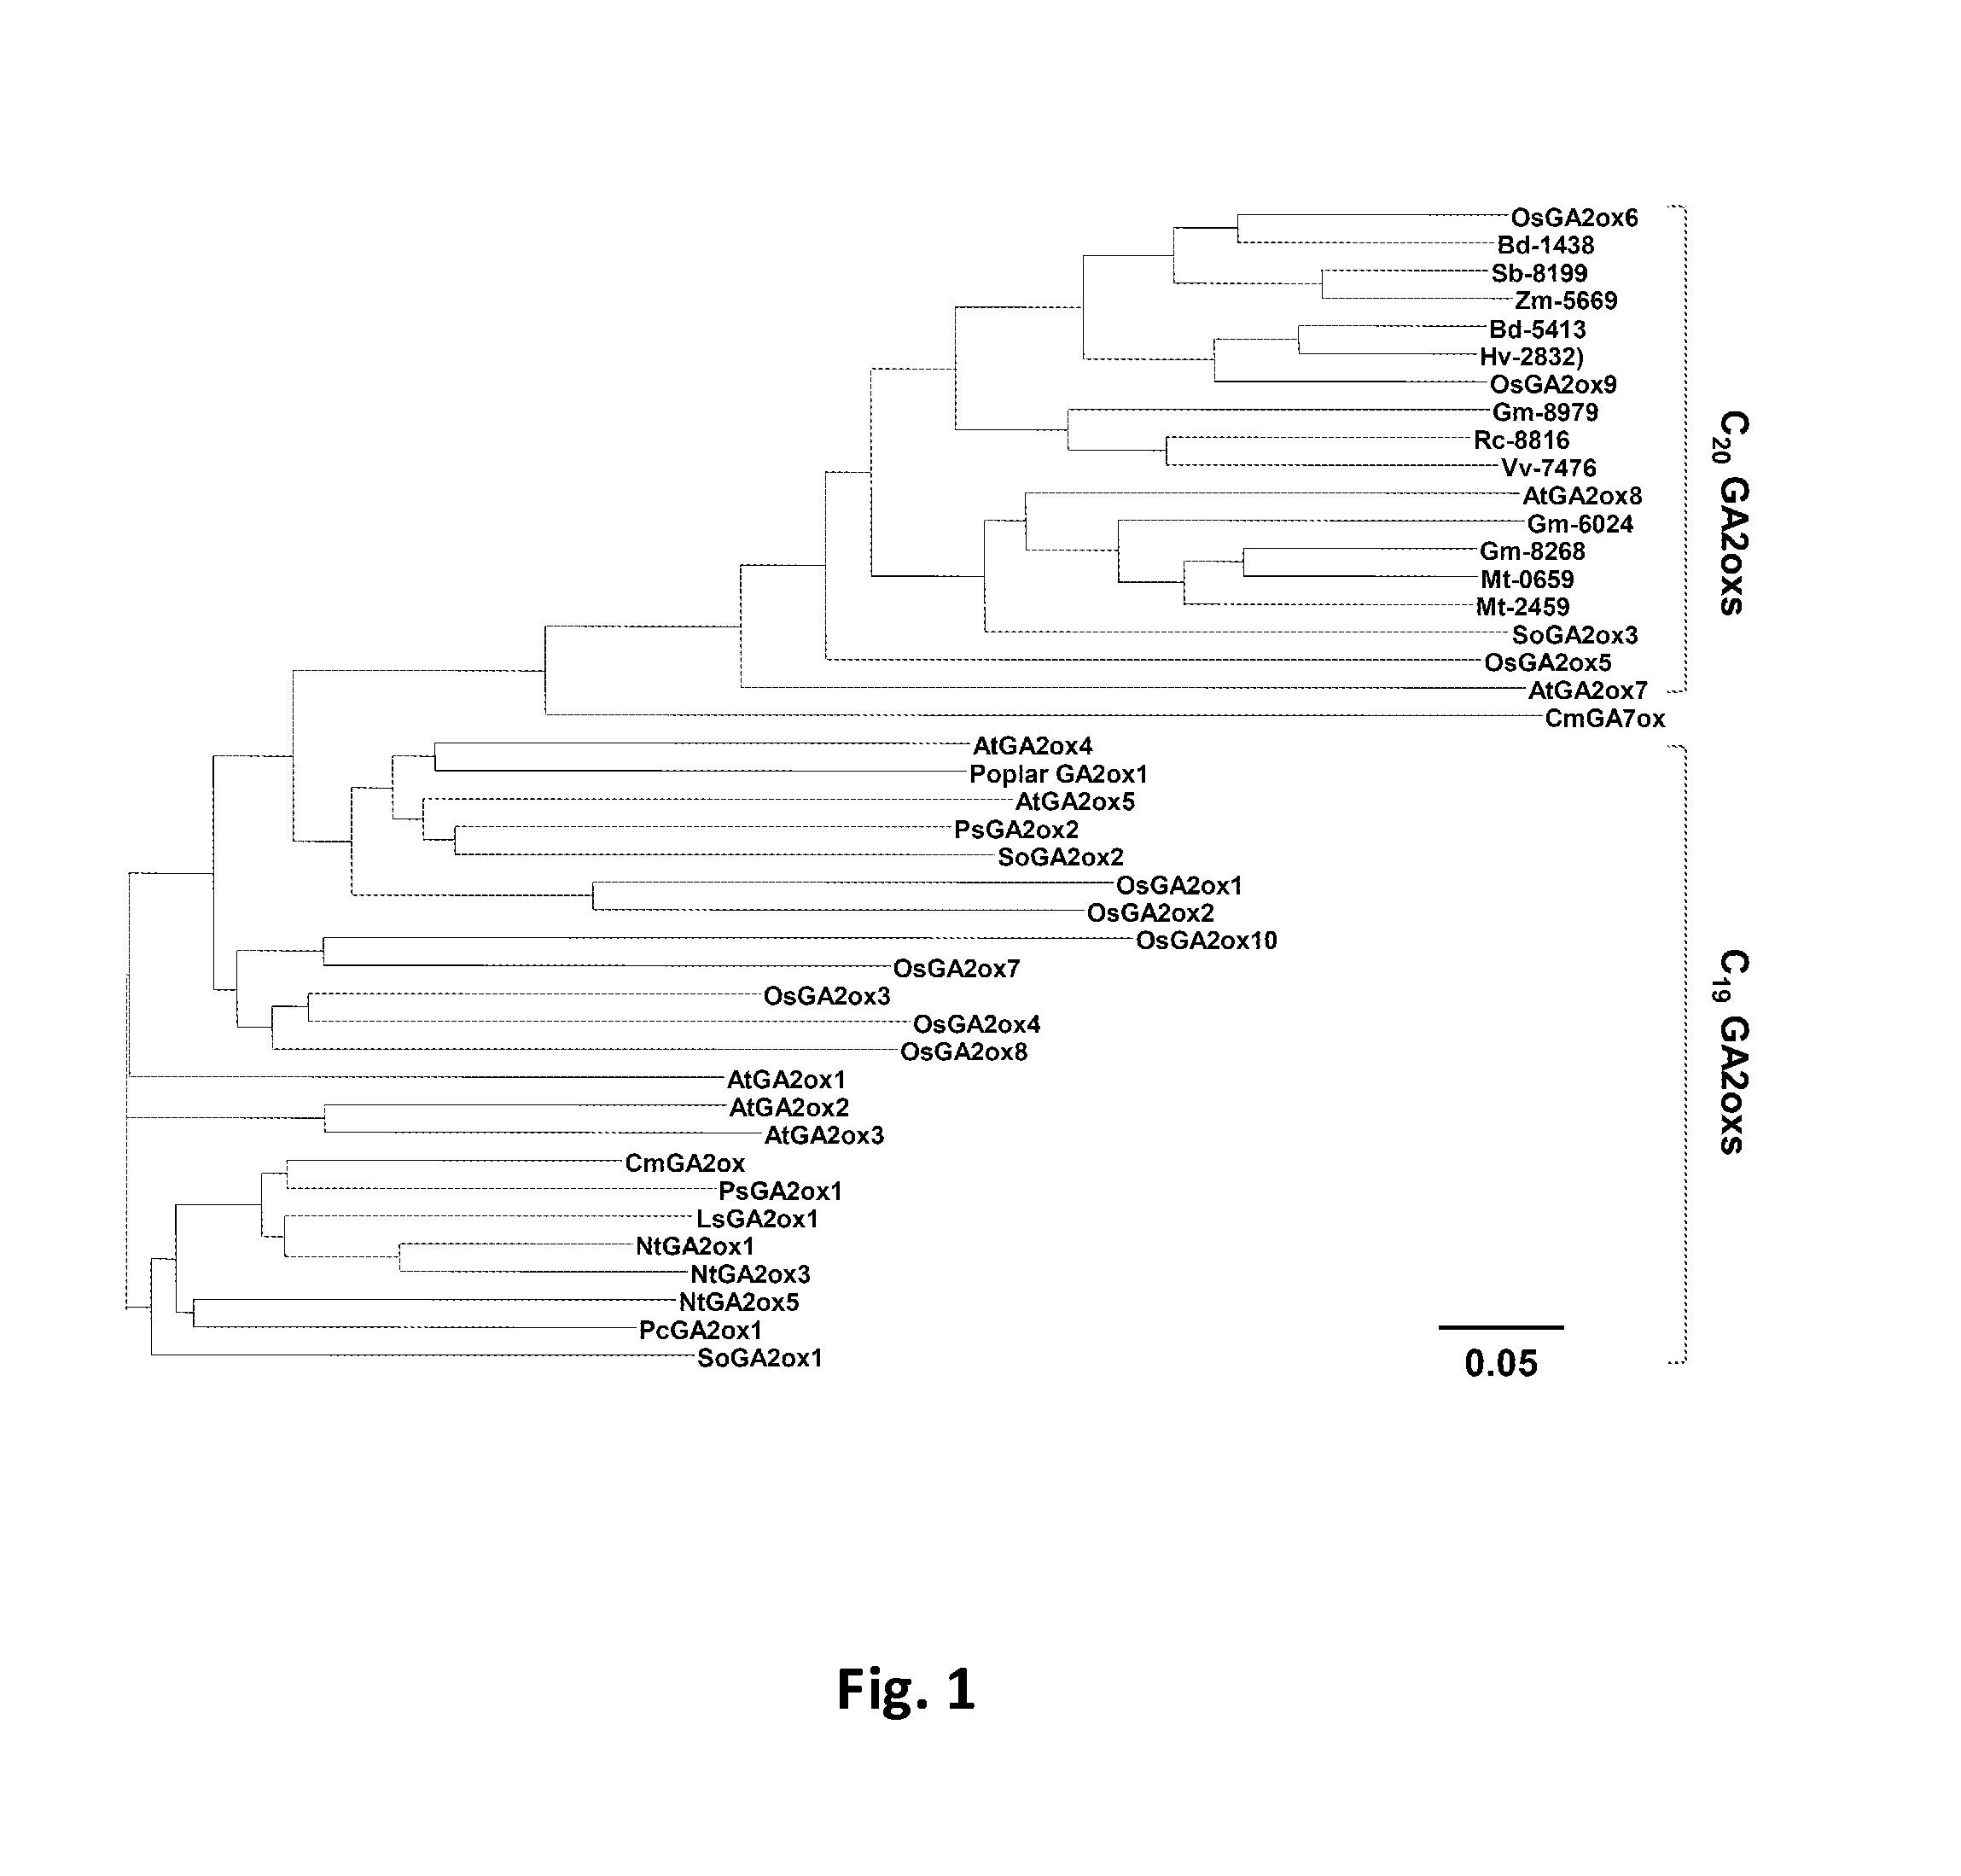 Mutant gibberellin 2-oxidase genes and uses thereof